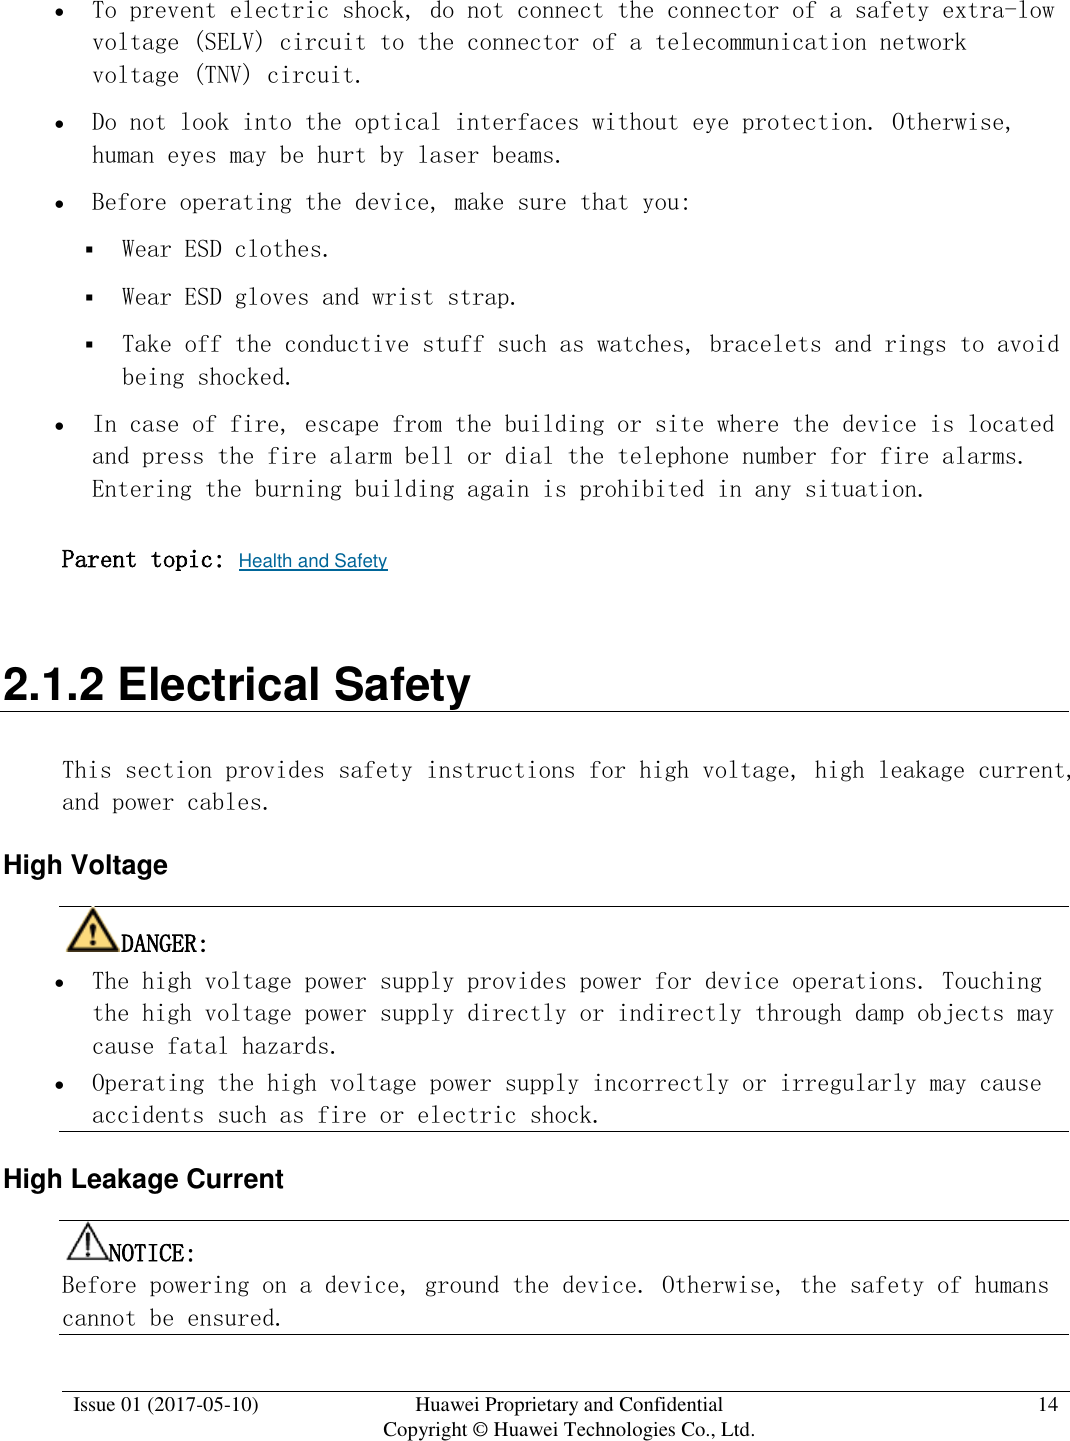  Issue 01 (2017-05-10) Huawei Proprietary and Confidential      Copyright © Huawei Technologies Co., Ltd. 14   To prevent electric shock, do not connect the connector of a safety extra-low voltage (SELV) circuit to the connector of a telecommunication network voltage (TNV) circuit.   Do not look into the optical interfaces without eye protection. Otherwise, human eyes may be hurt by laser beams.   Before operating the device, make sure that you:  Wear ESD clothes.  Wear ESD gloves and wrist strap.  Take off the conductive stuff such as watches, bracelets and rings to avoid being shocked.  In case of fire, escape from the building or site where the device is located and press the fire alarm bell or dial the telephone number for fire alarms. Entering the burning building again is prohibited in any situation.  Parent topic: Health and Safety 2.1.2 Electrical Safety This section provides safety instructions for high voltage, high leakage current, and power cables.  High Voltage DANGER:   The high voltage power supply provides power for device operations. Touching the high voltage power supply directly or indirectly through damp objects may cause fatal hazards.   Operating the high voltage power supply incorrectly or irregularly may cause accidents such as fire or electric shock.  High Leakage Current NOTICE:  Before powering on a device, ground the device. Otherwise, the safety of humans cannot be ensured.  